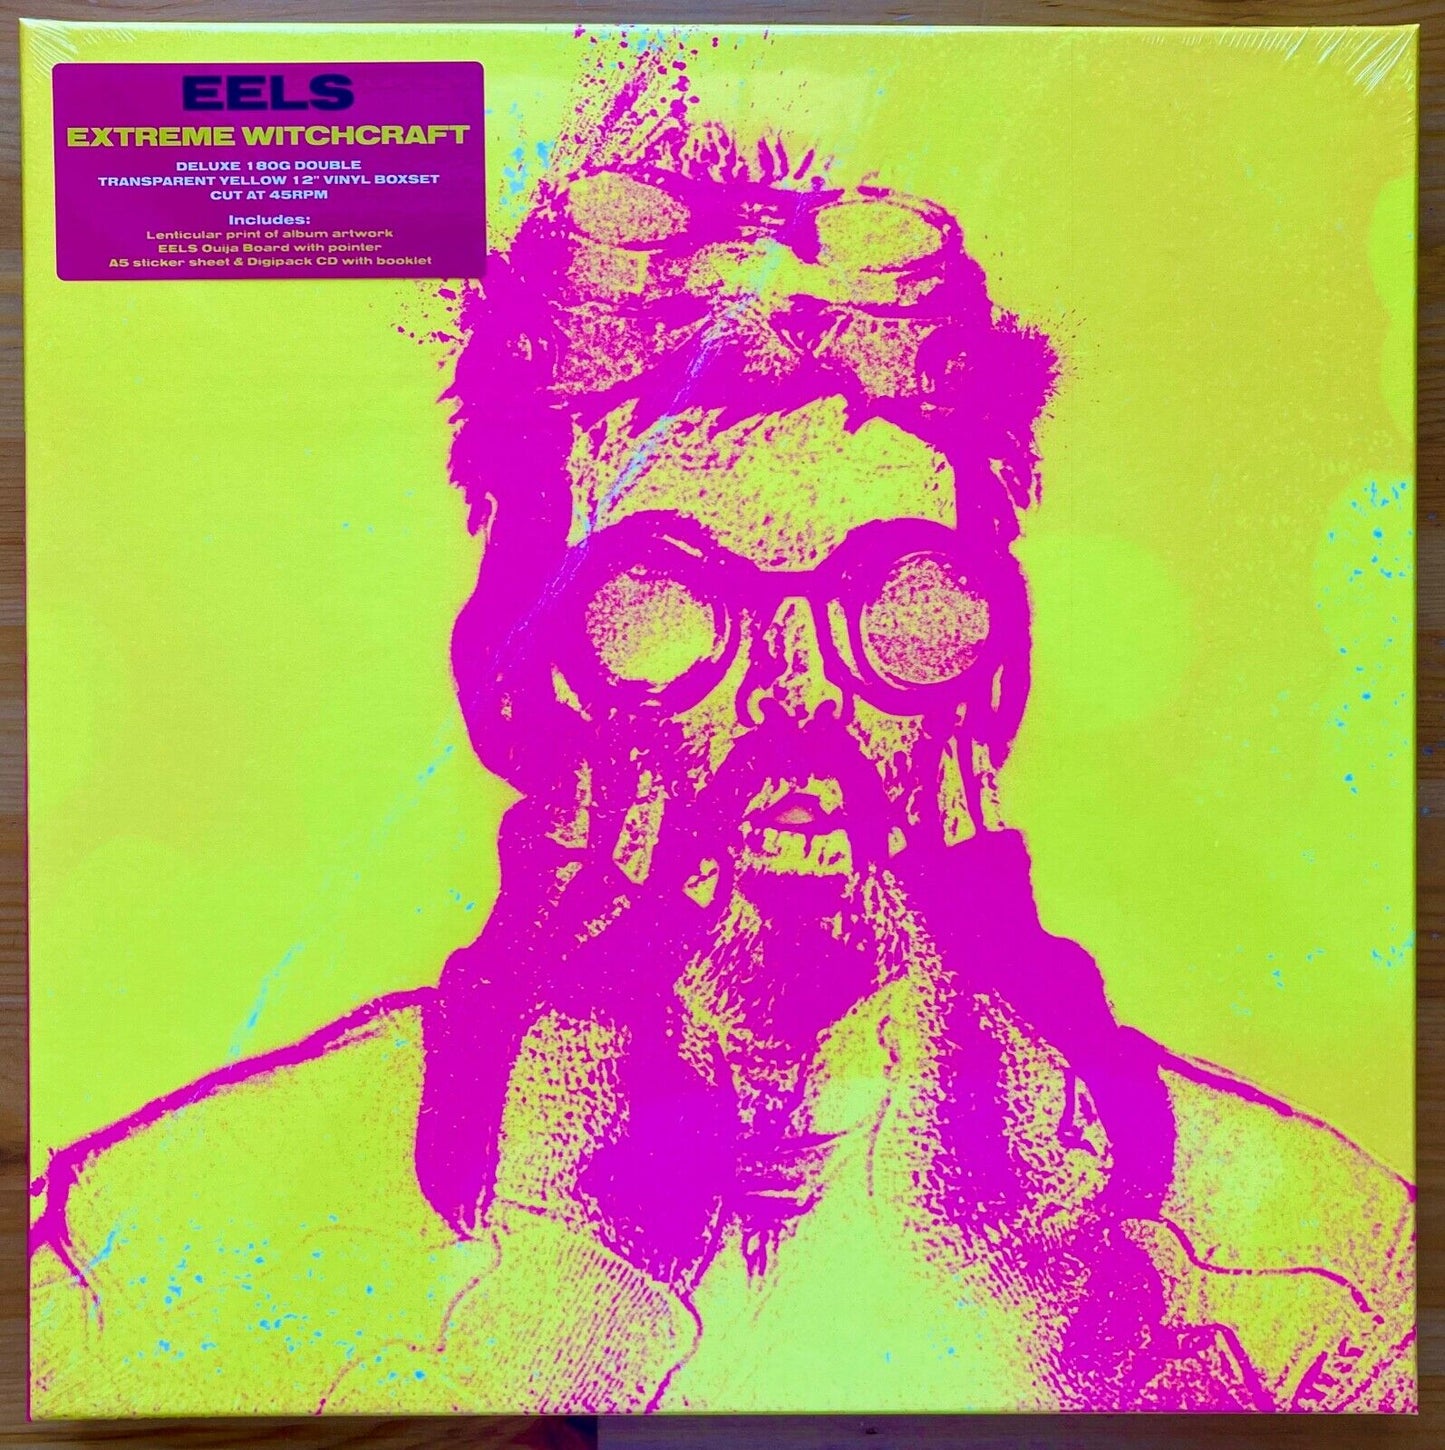 Eels - Extreme Witchcraft See My Engine Gleam Yellow Vinyl 2LP + CD Limited & Deluxe Edition